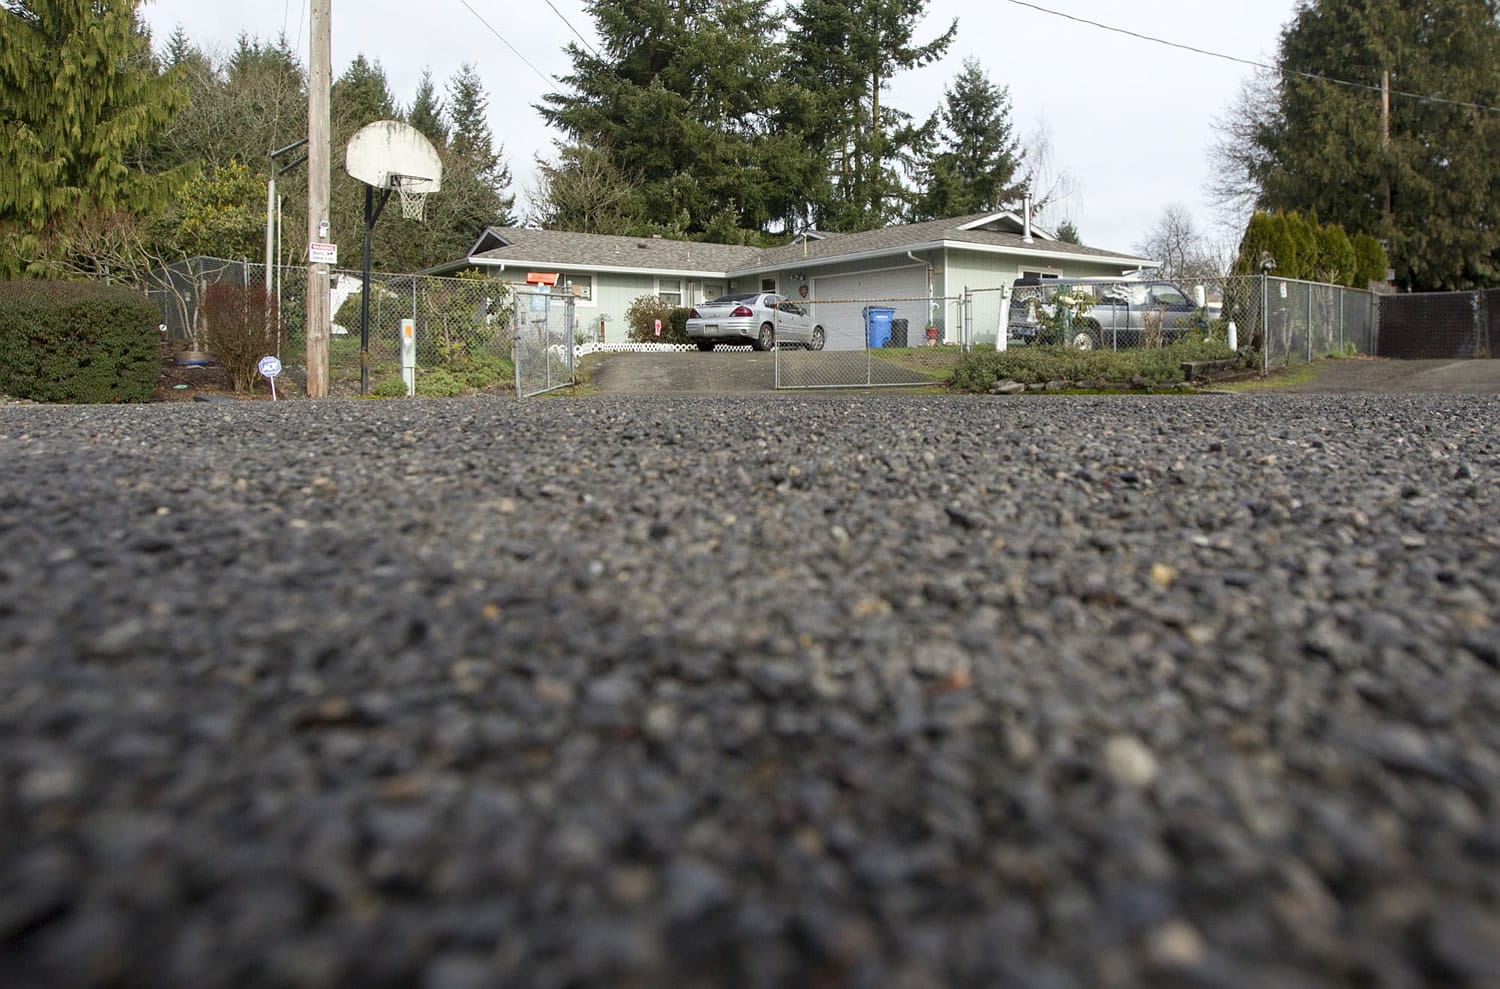 Residents on a segment of Northeast 89th Avenue in the Sunnyside neighborhood are frustrated with Clark County leaving their road unfinished after beginning repairs in August.